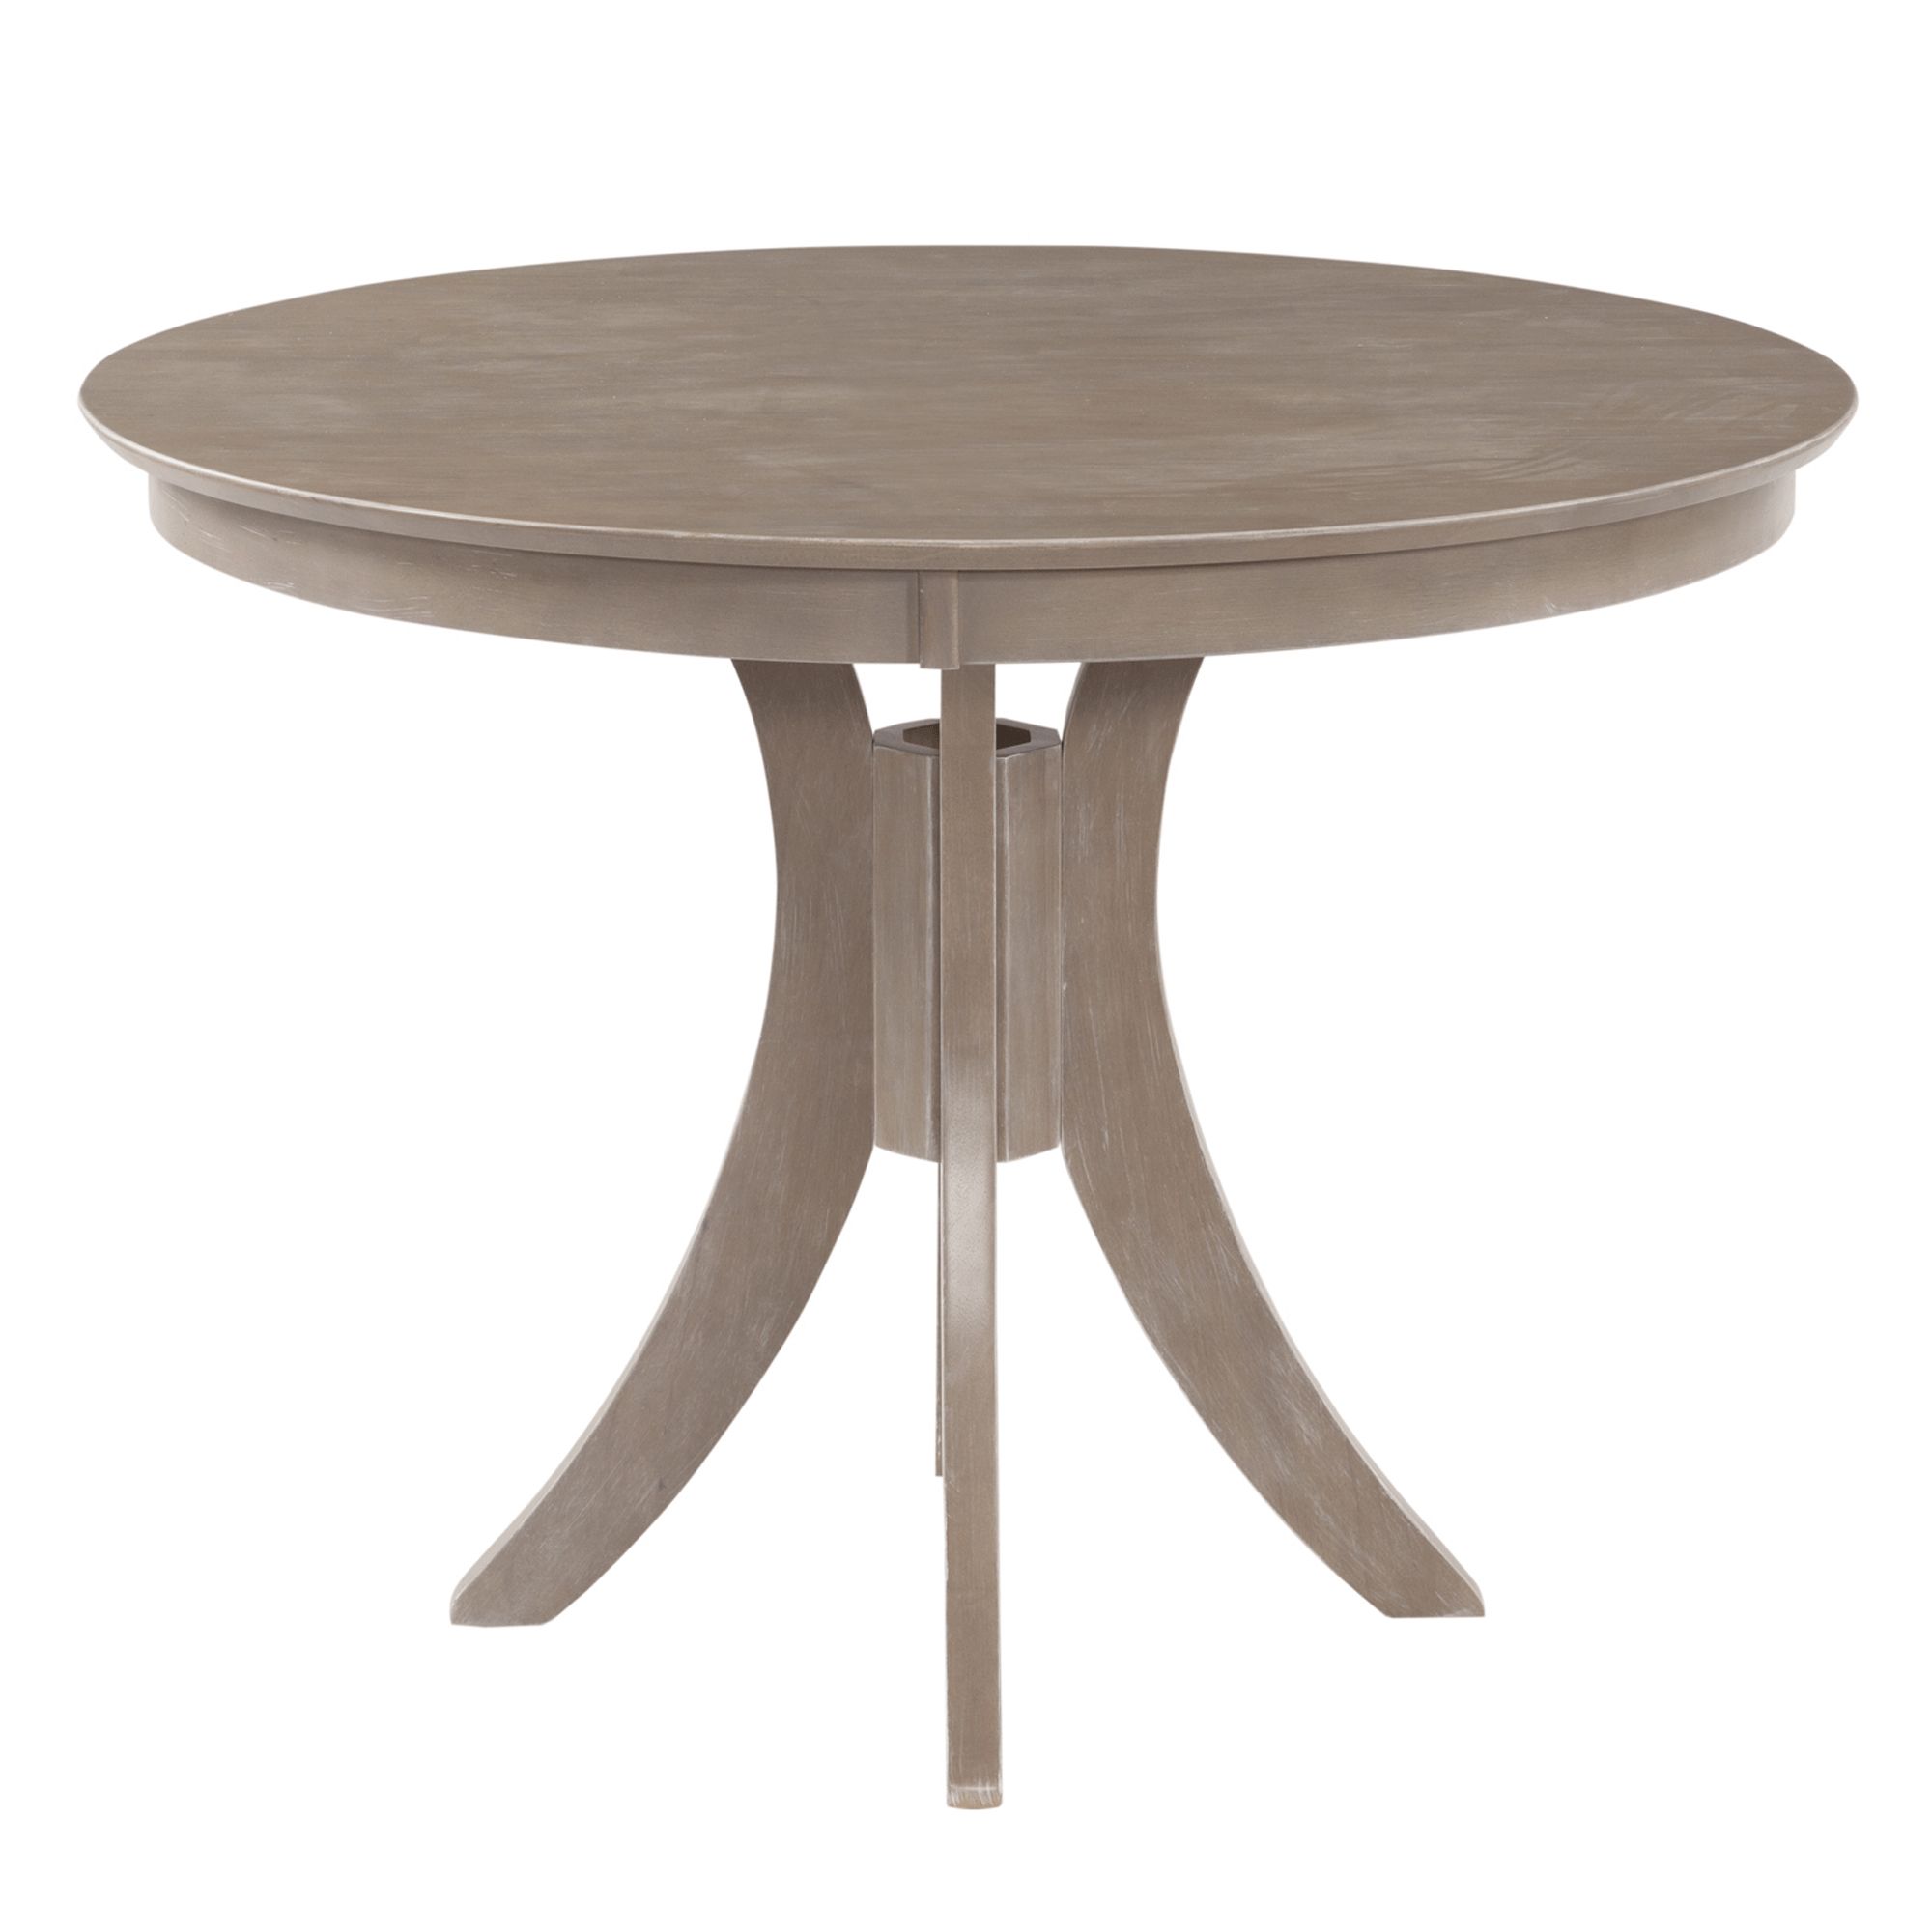 Cosmopolitan Weathered Grey Dining Room Pedestal Table 48 With Current Hitchin 36'' Dining Tables (View 1 of 20)